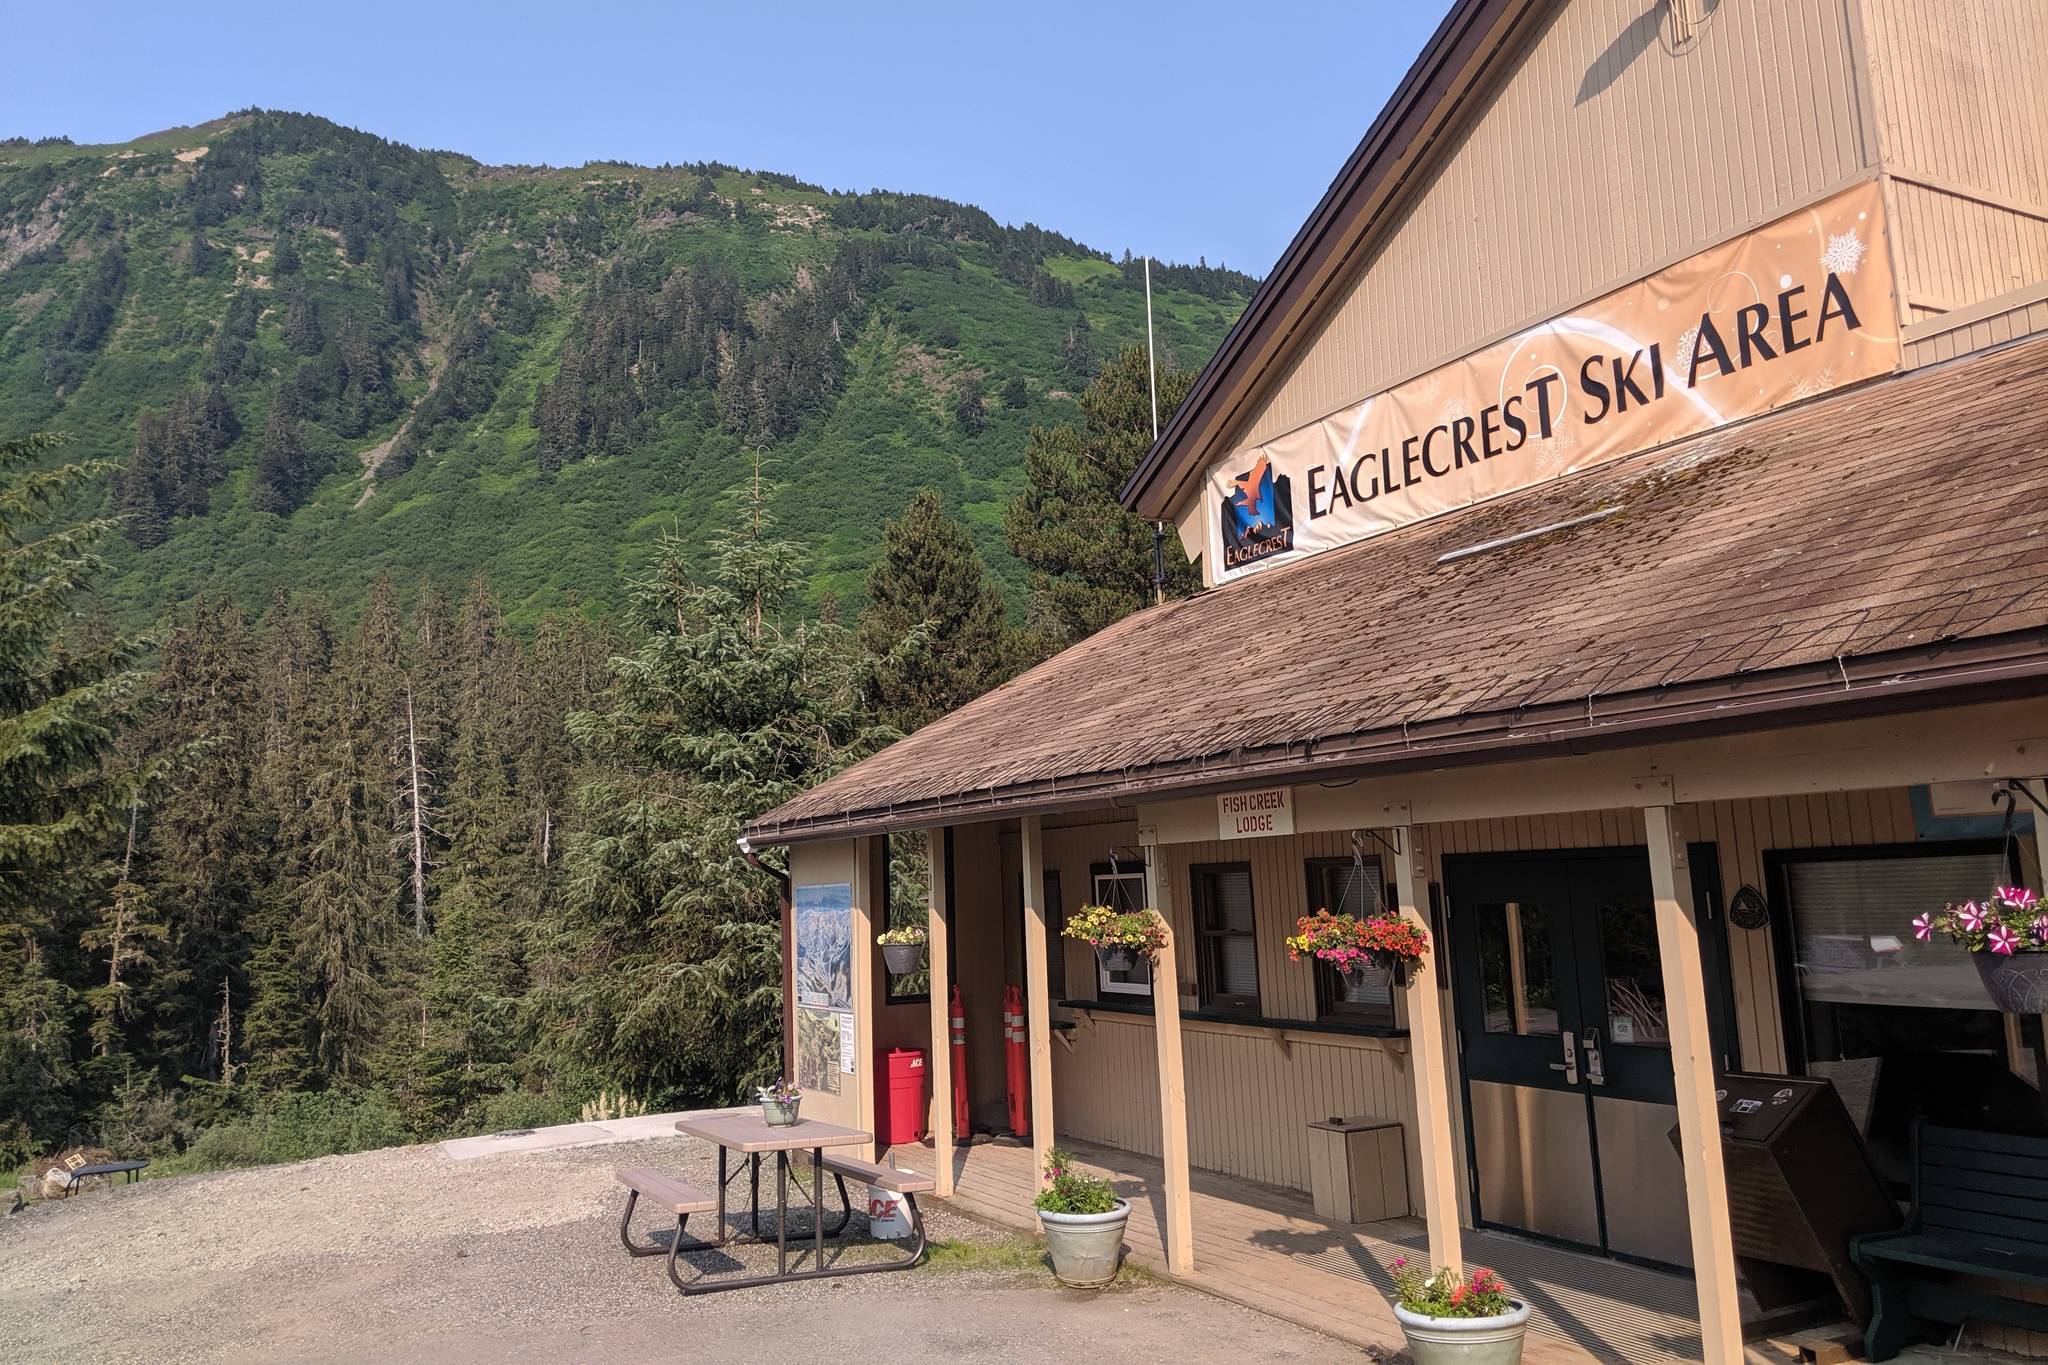 Eaglecrest Ski Area wants to expand its summer offerings and it hosted a meeting for North Douglas Neighborhood Association. (Ben Hohenstatt | Juneau Empire)